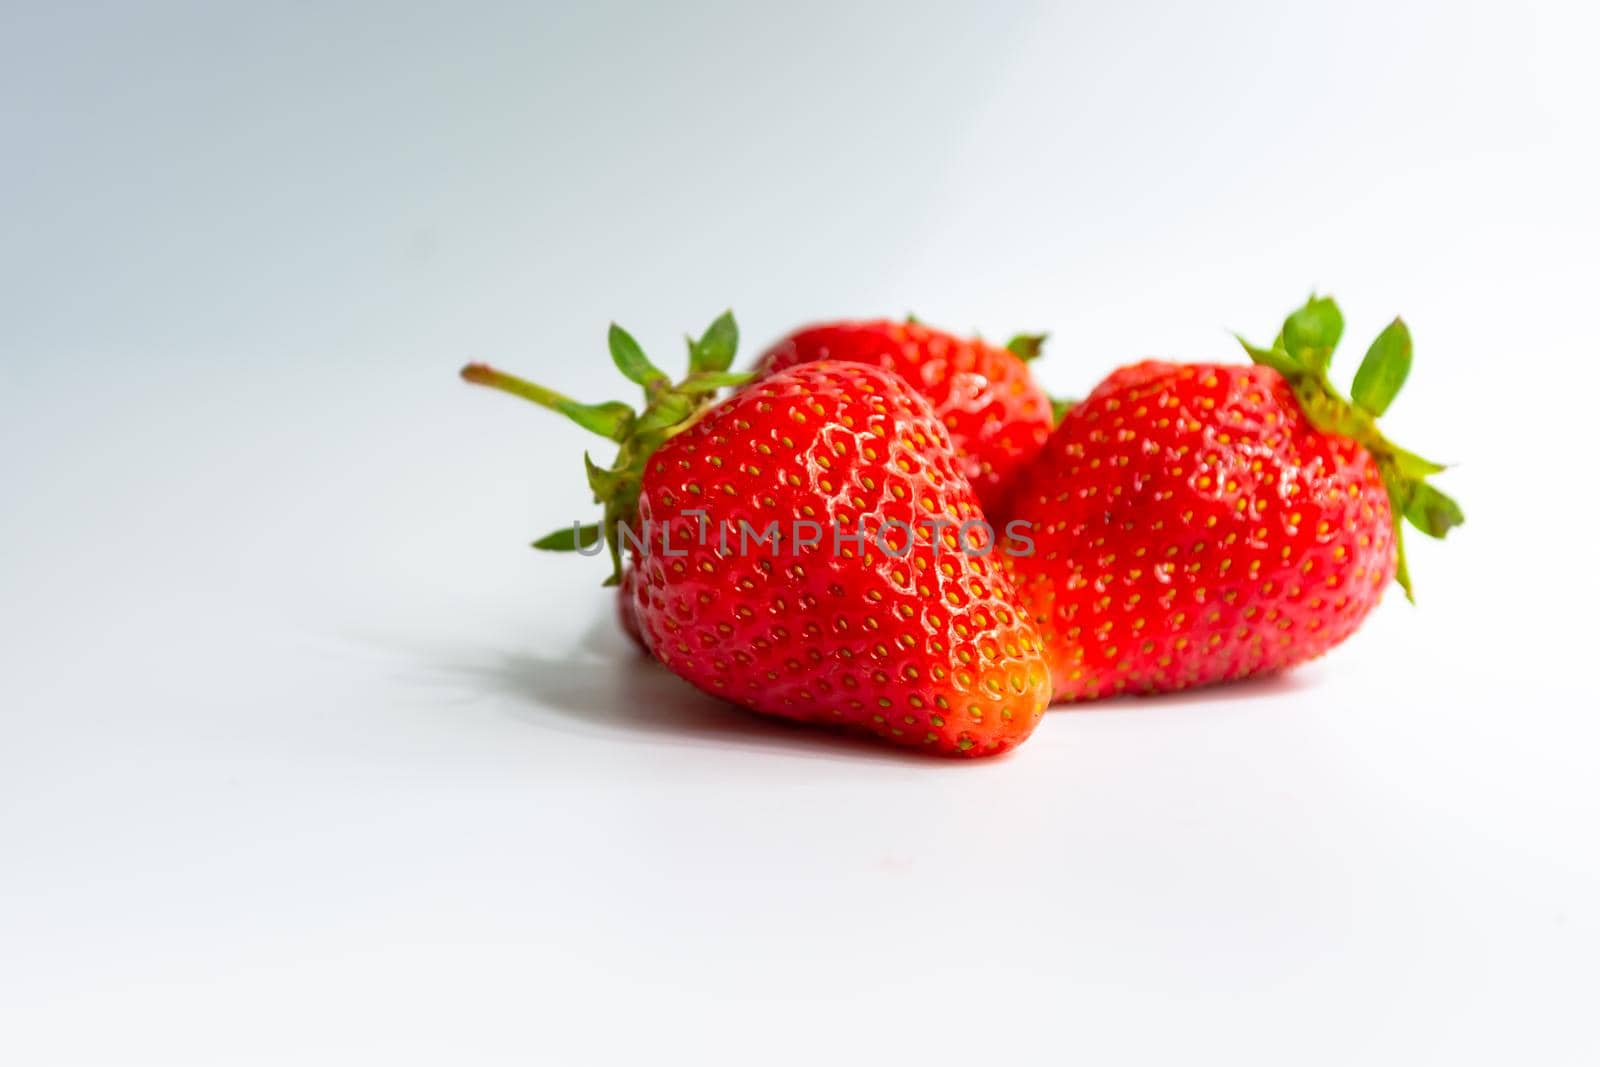 Red ripe juicy strawberries on a white gray background. Sweet natural dessert.